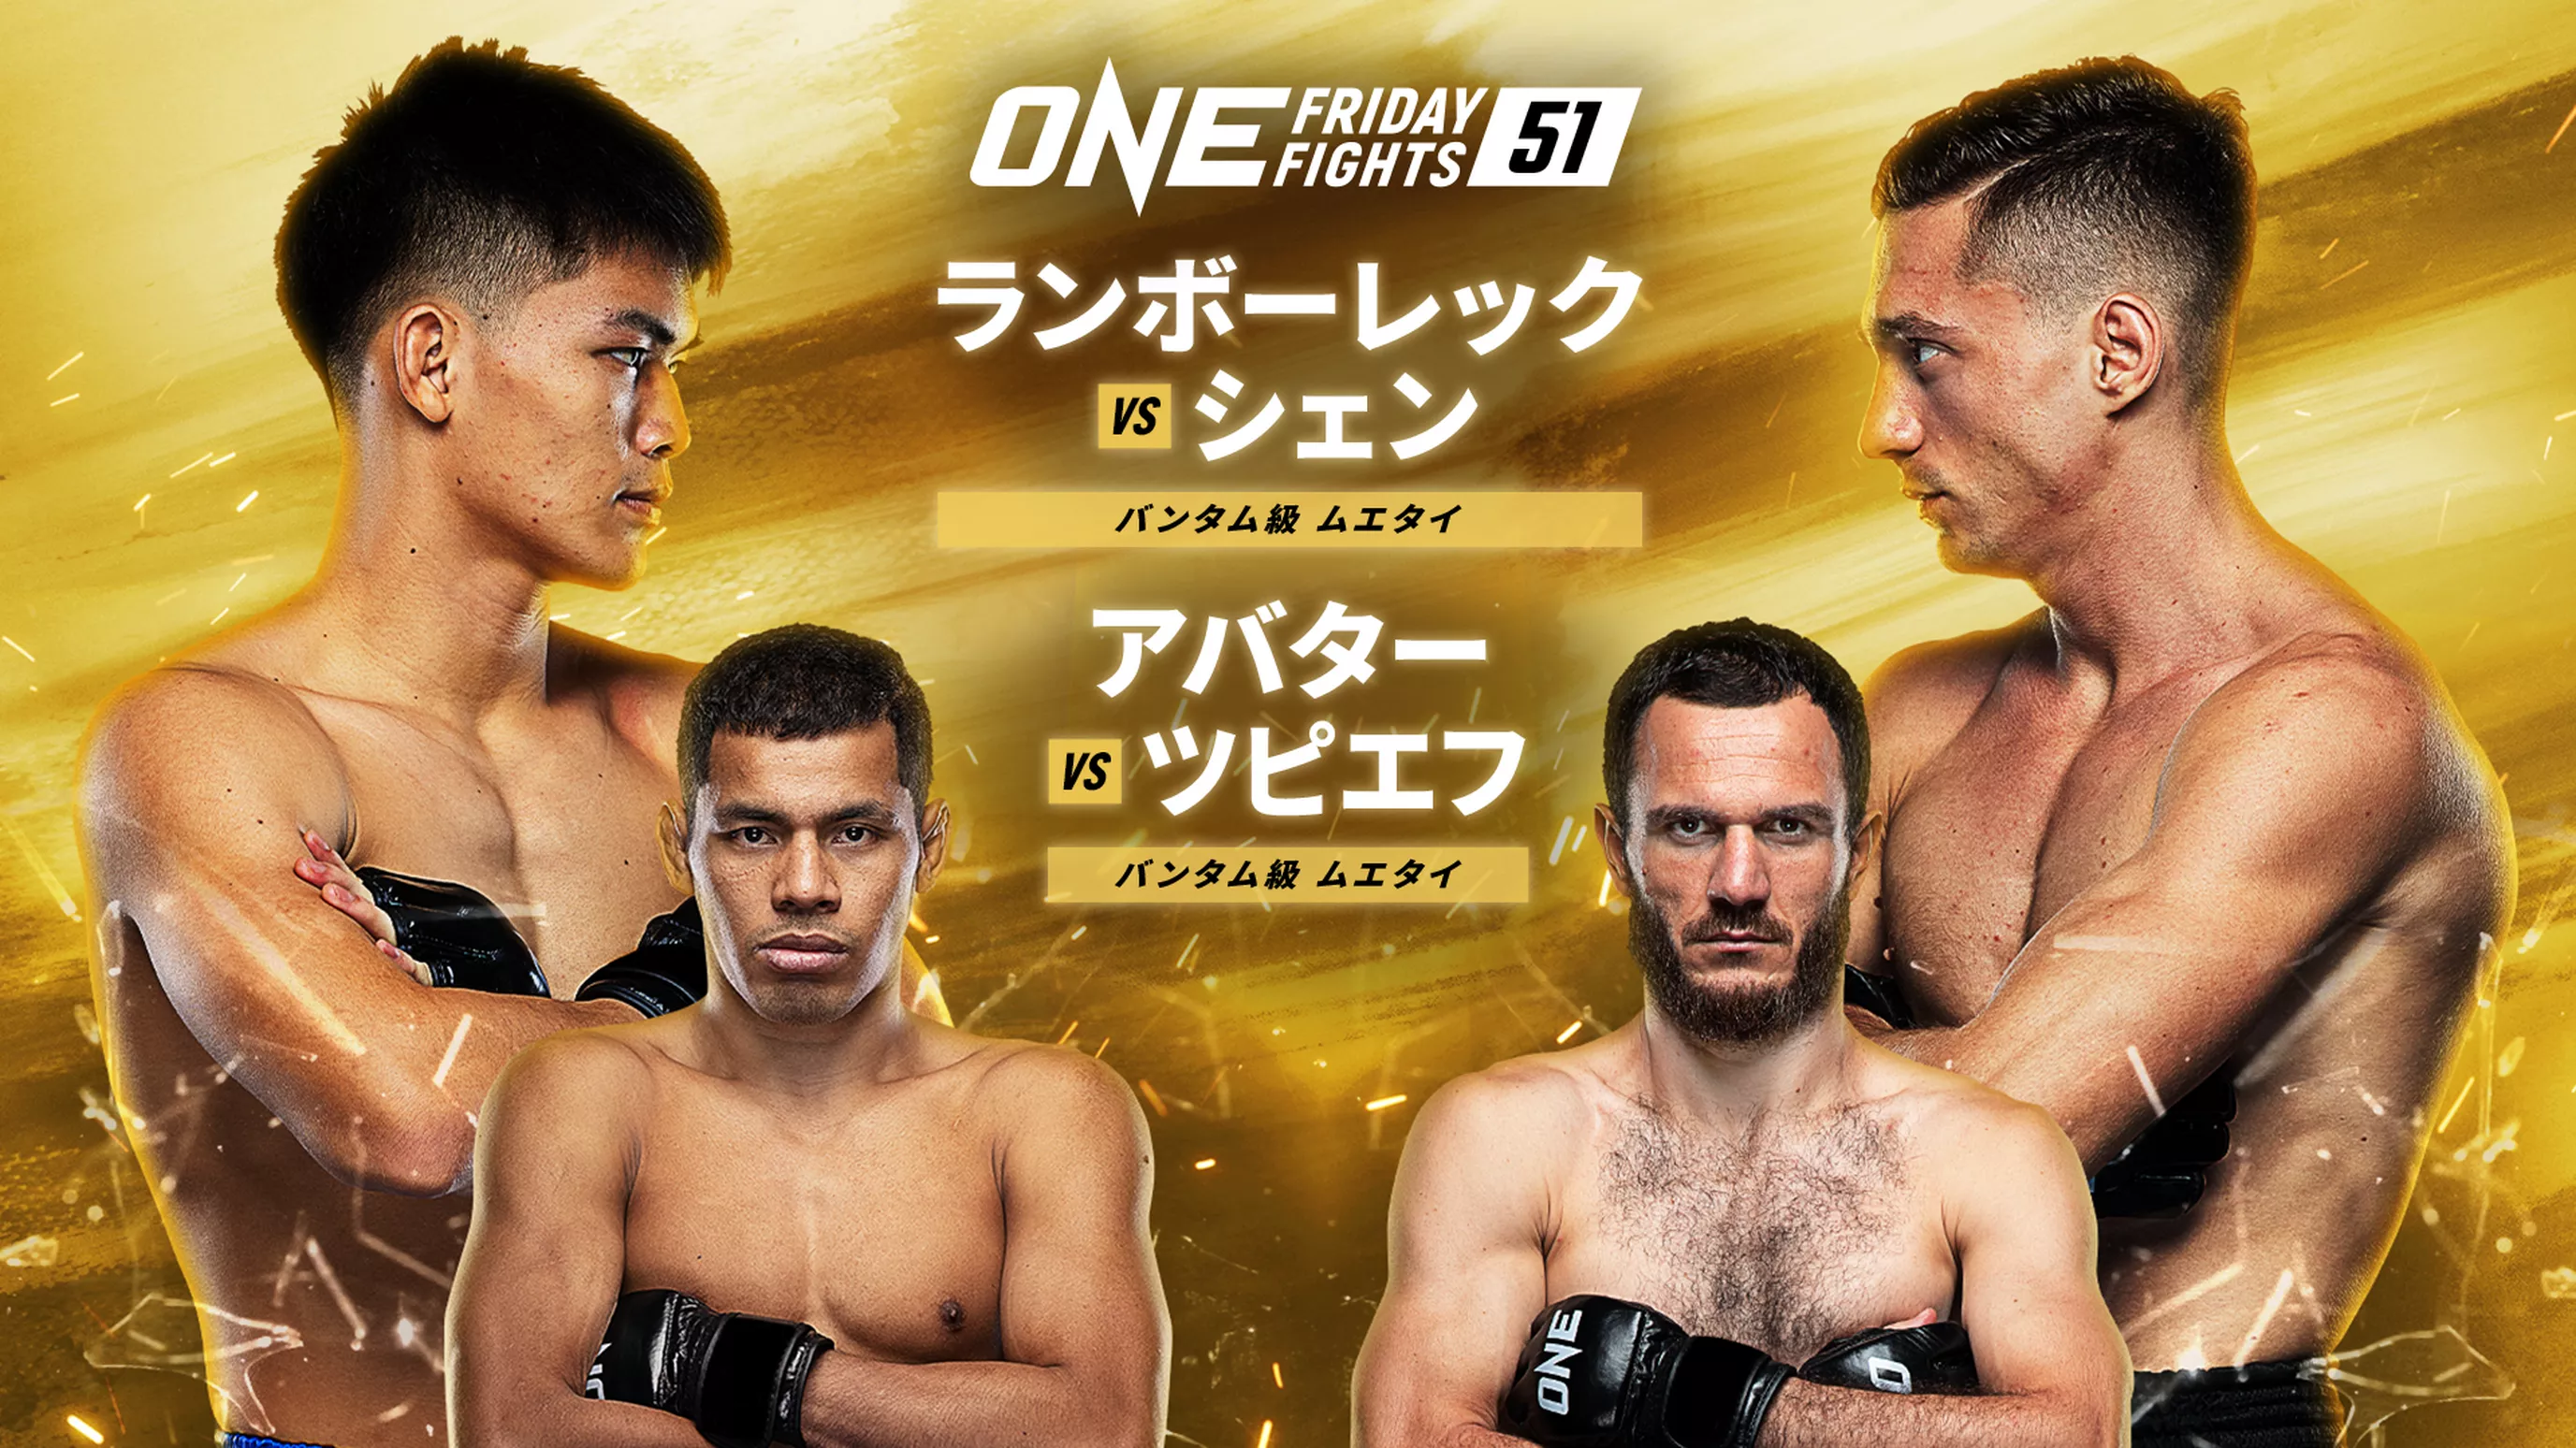 ONE Friday Fights 51